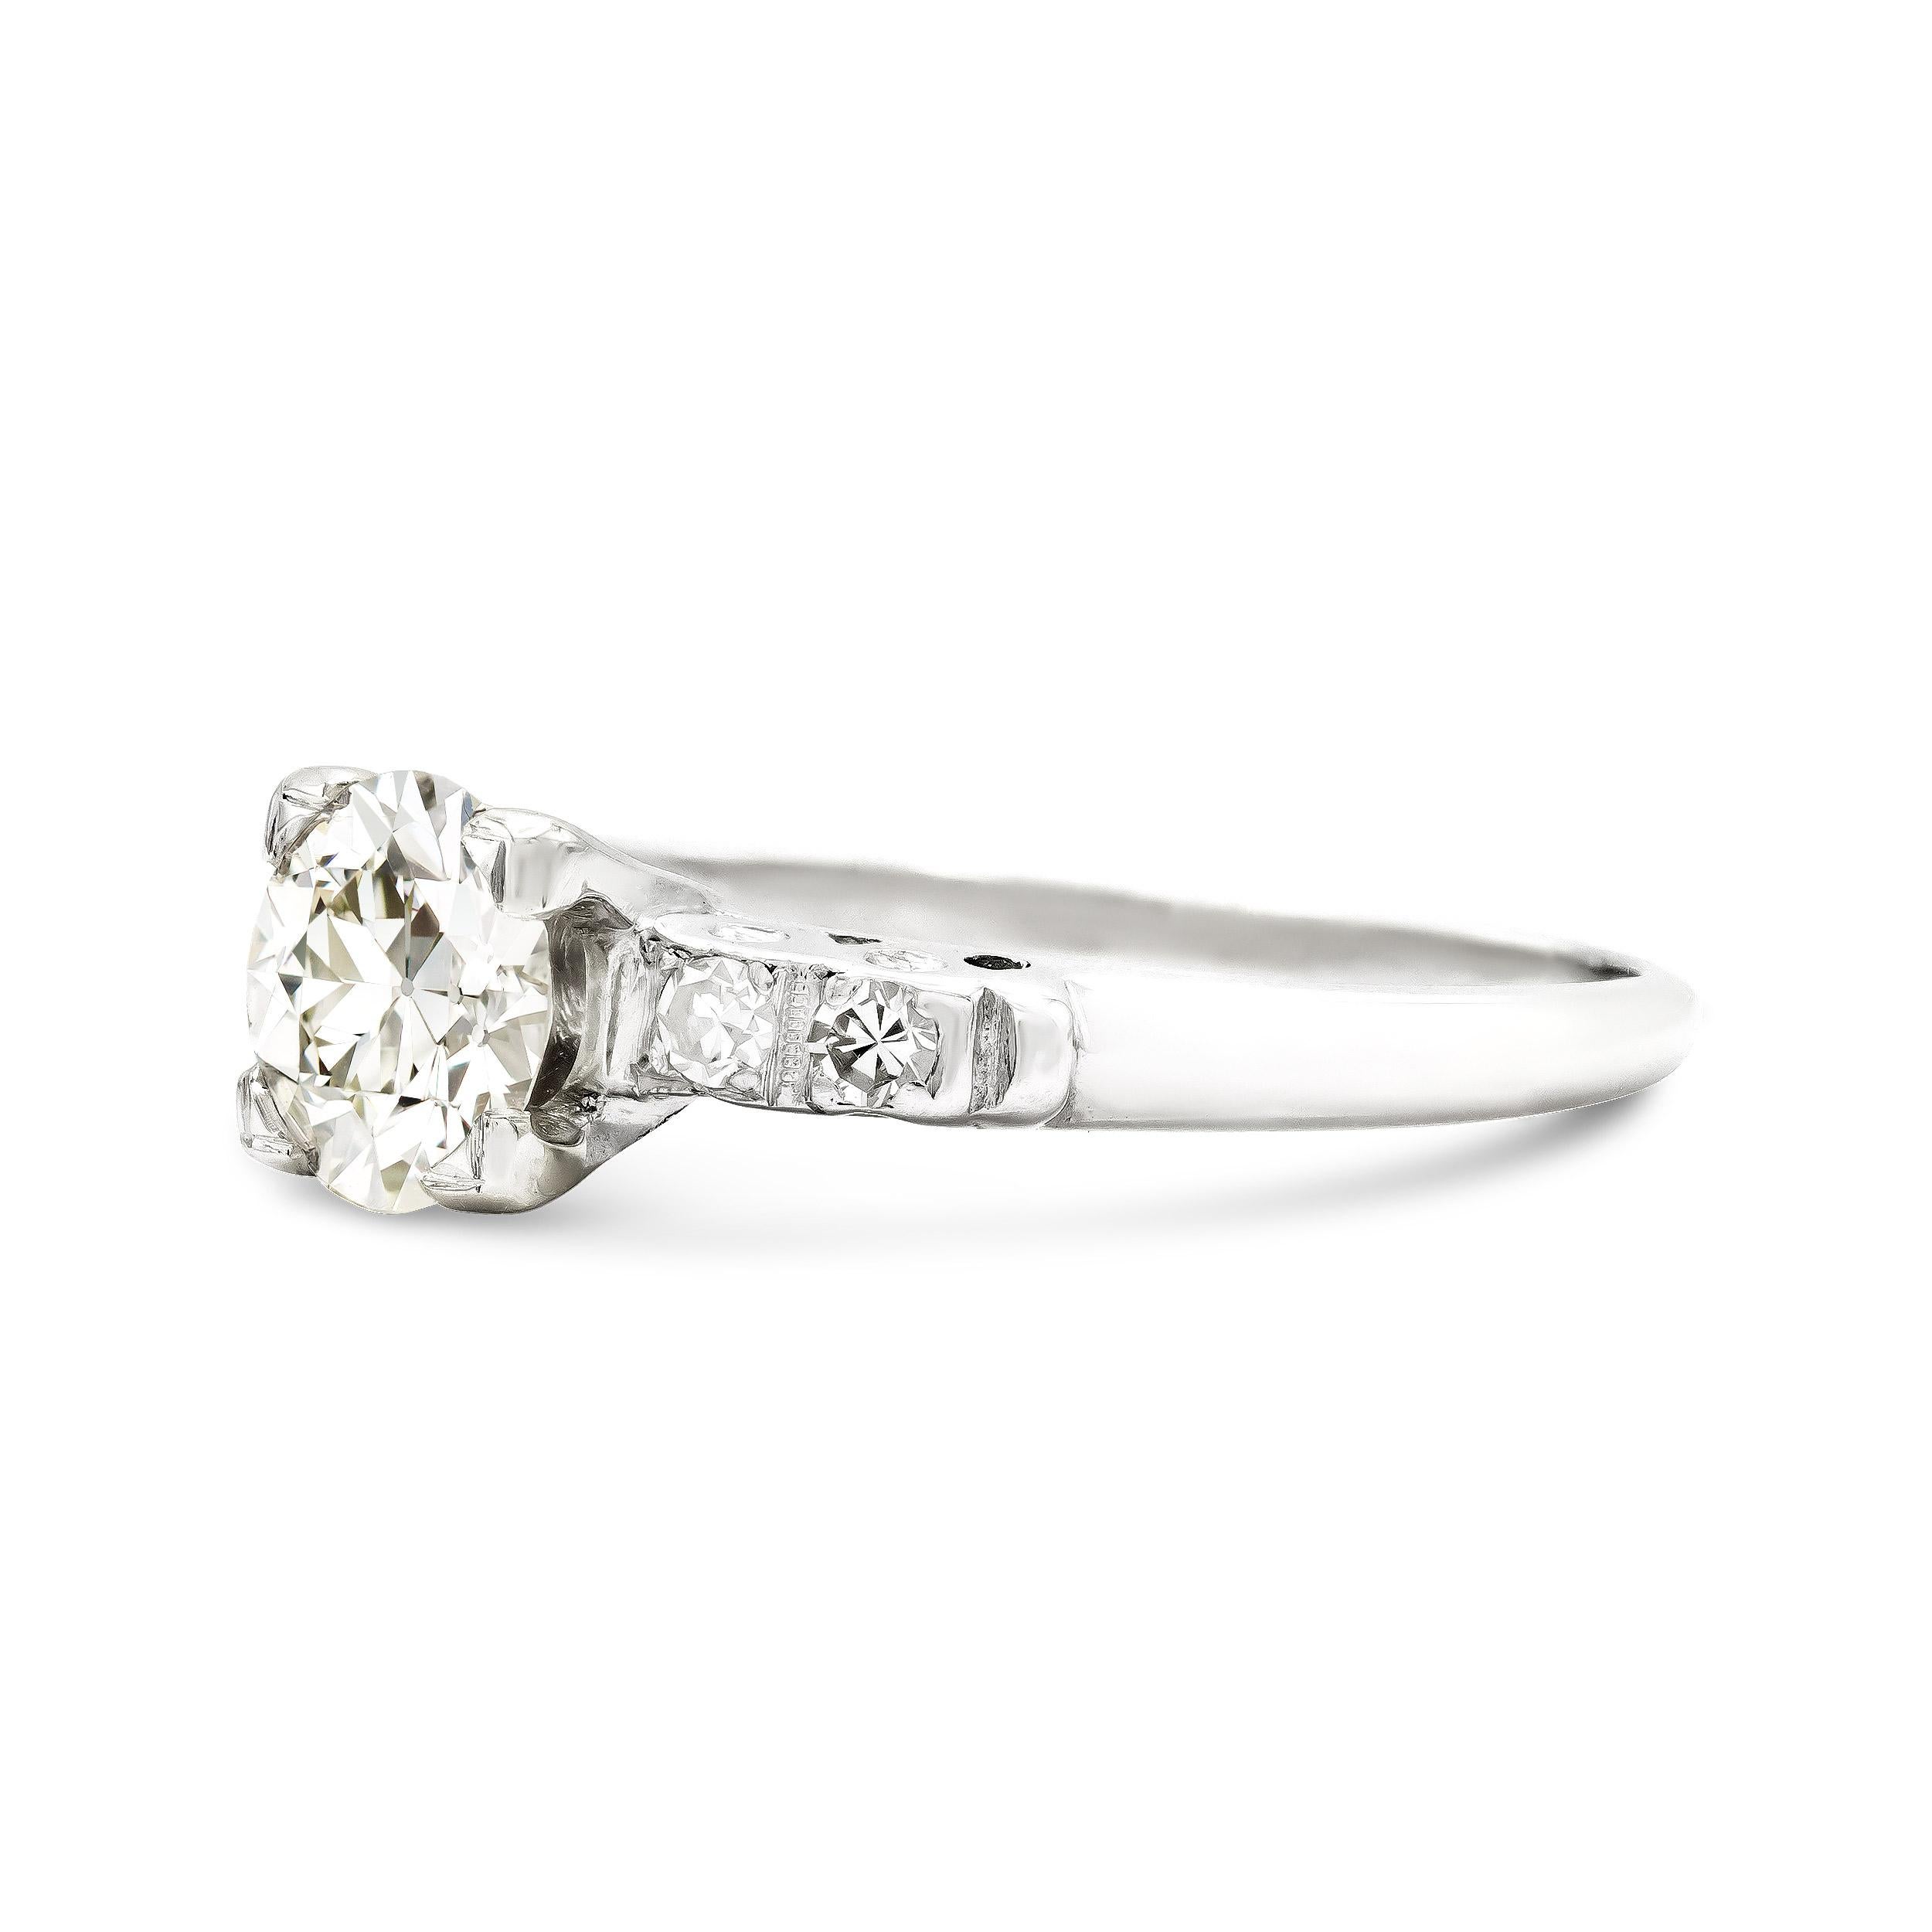 Here's a charming Art Deco era platinum engagement ring, sure to win any girl's heart. A super bright old European cut diamond is the center of attention, gleaming from a square basket. We love the round accent diamonds set in platinum, a classic